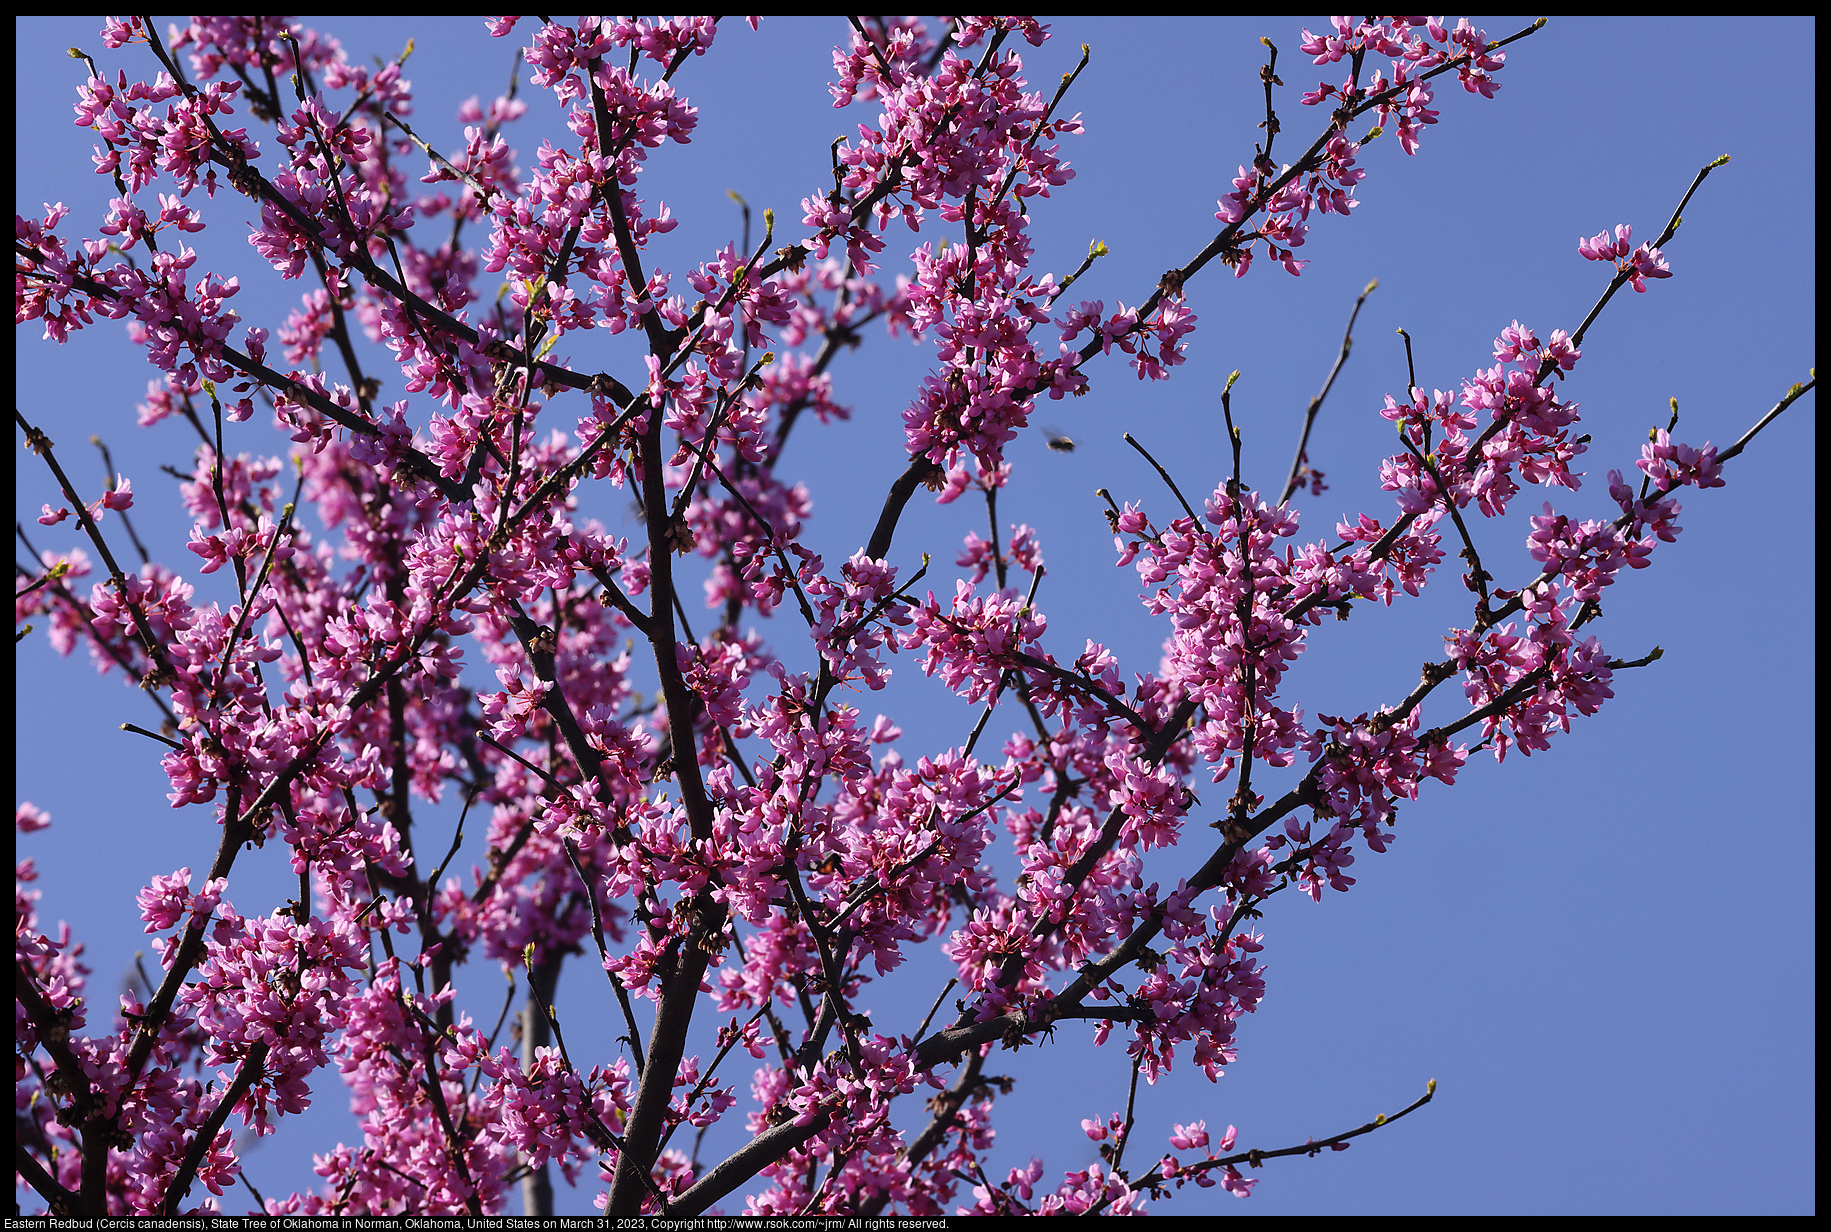 Eastern Redbud (Cercis canadensis), State Tree of Oklahoma in Norman, Oklahoma, United States on March 31, 2023